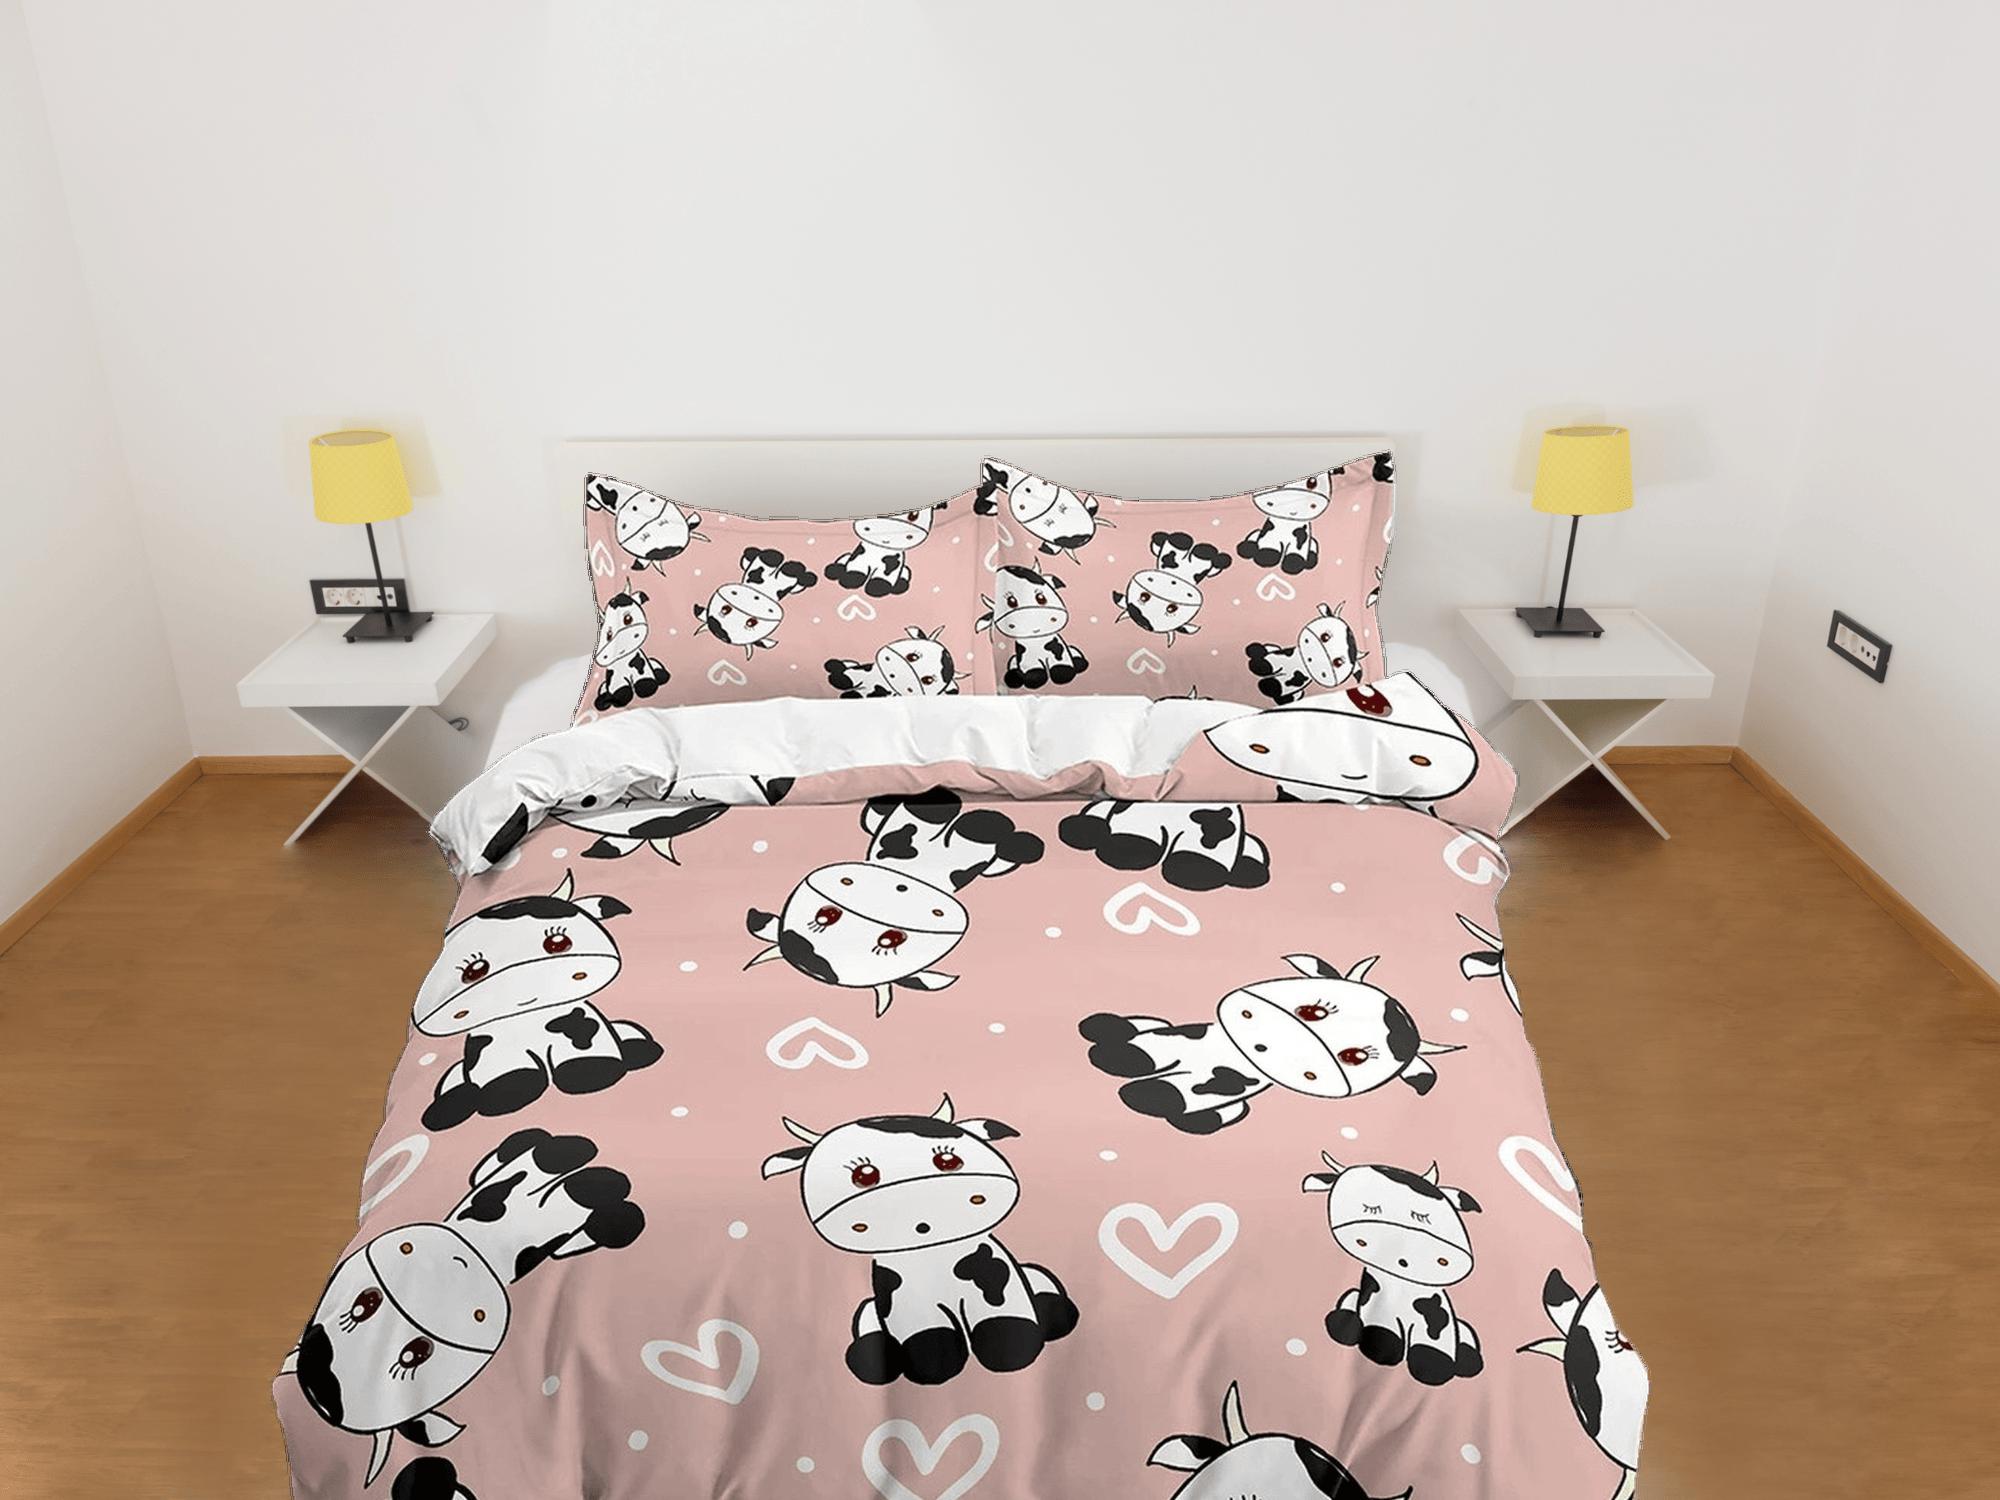 daintyduvet Cute Cow Peach Colored Toddler Bedding, Unique Duvet Cover for Kids, Crib Bedding with Pillowcase, Baby Zipper Bedding, King Queen Full Twin